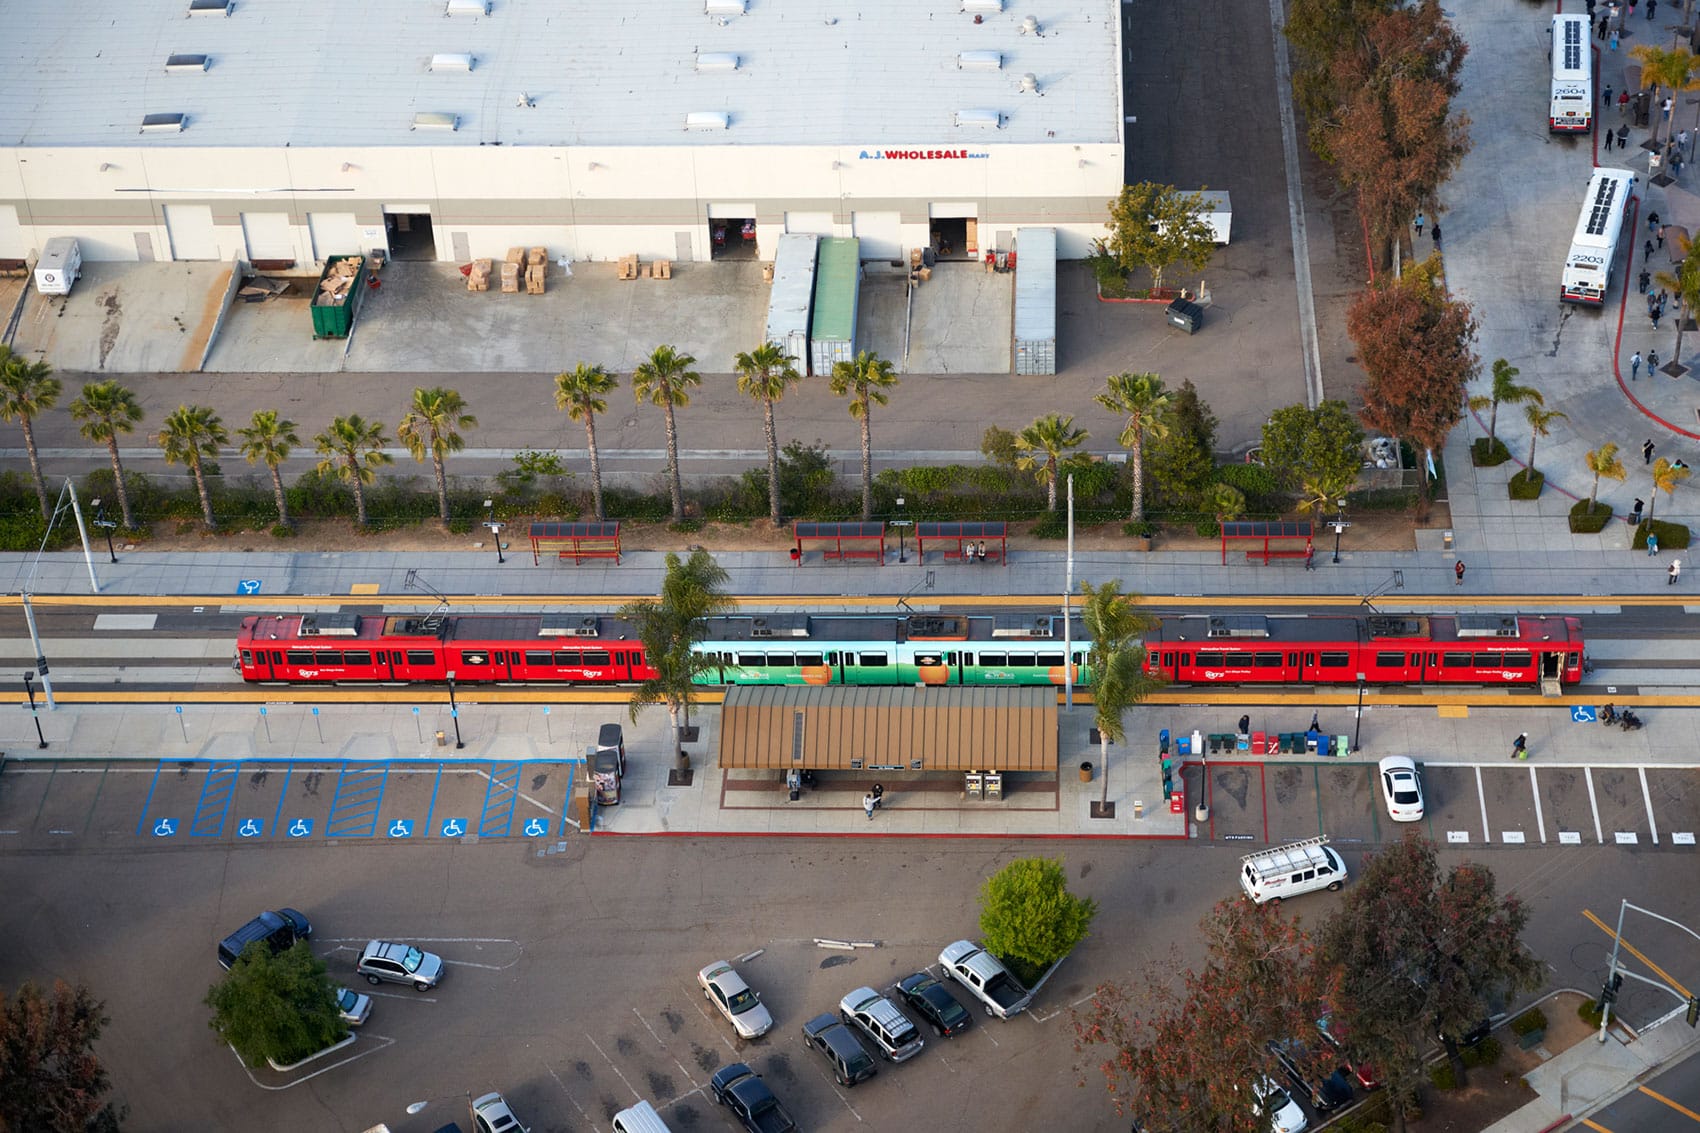 Kimley-Horn served as the prime consultant providing innovative planning and engineering design for SANDAG’s Blue Line LRT Renewal.